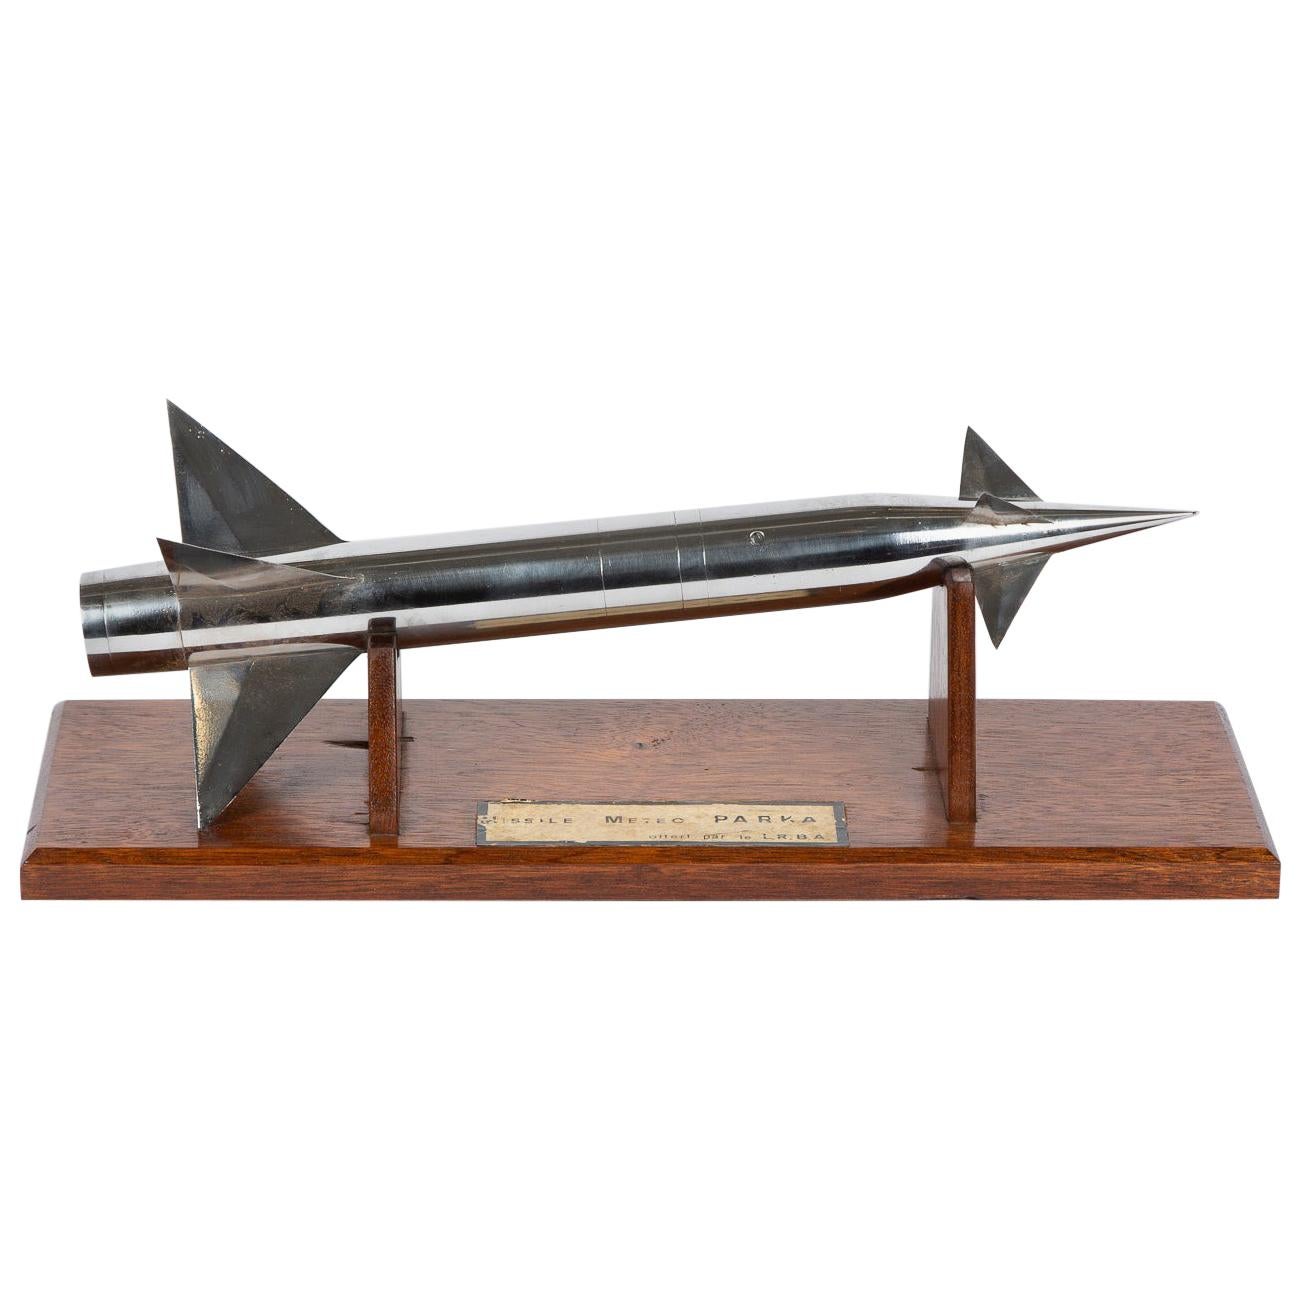 Wind Tunnel Model of a French Sounding Rocket